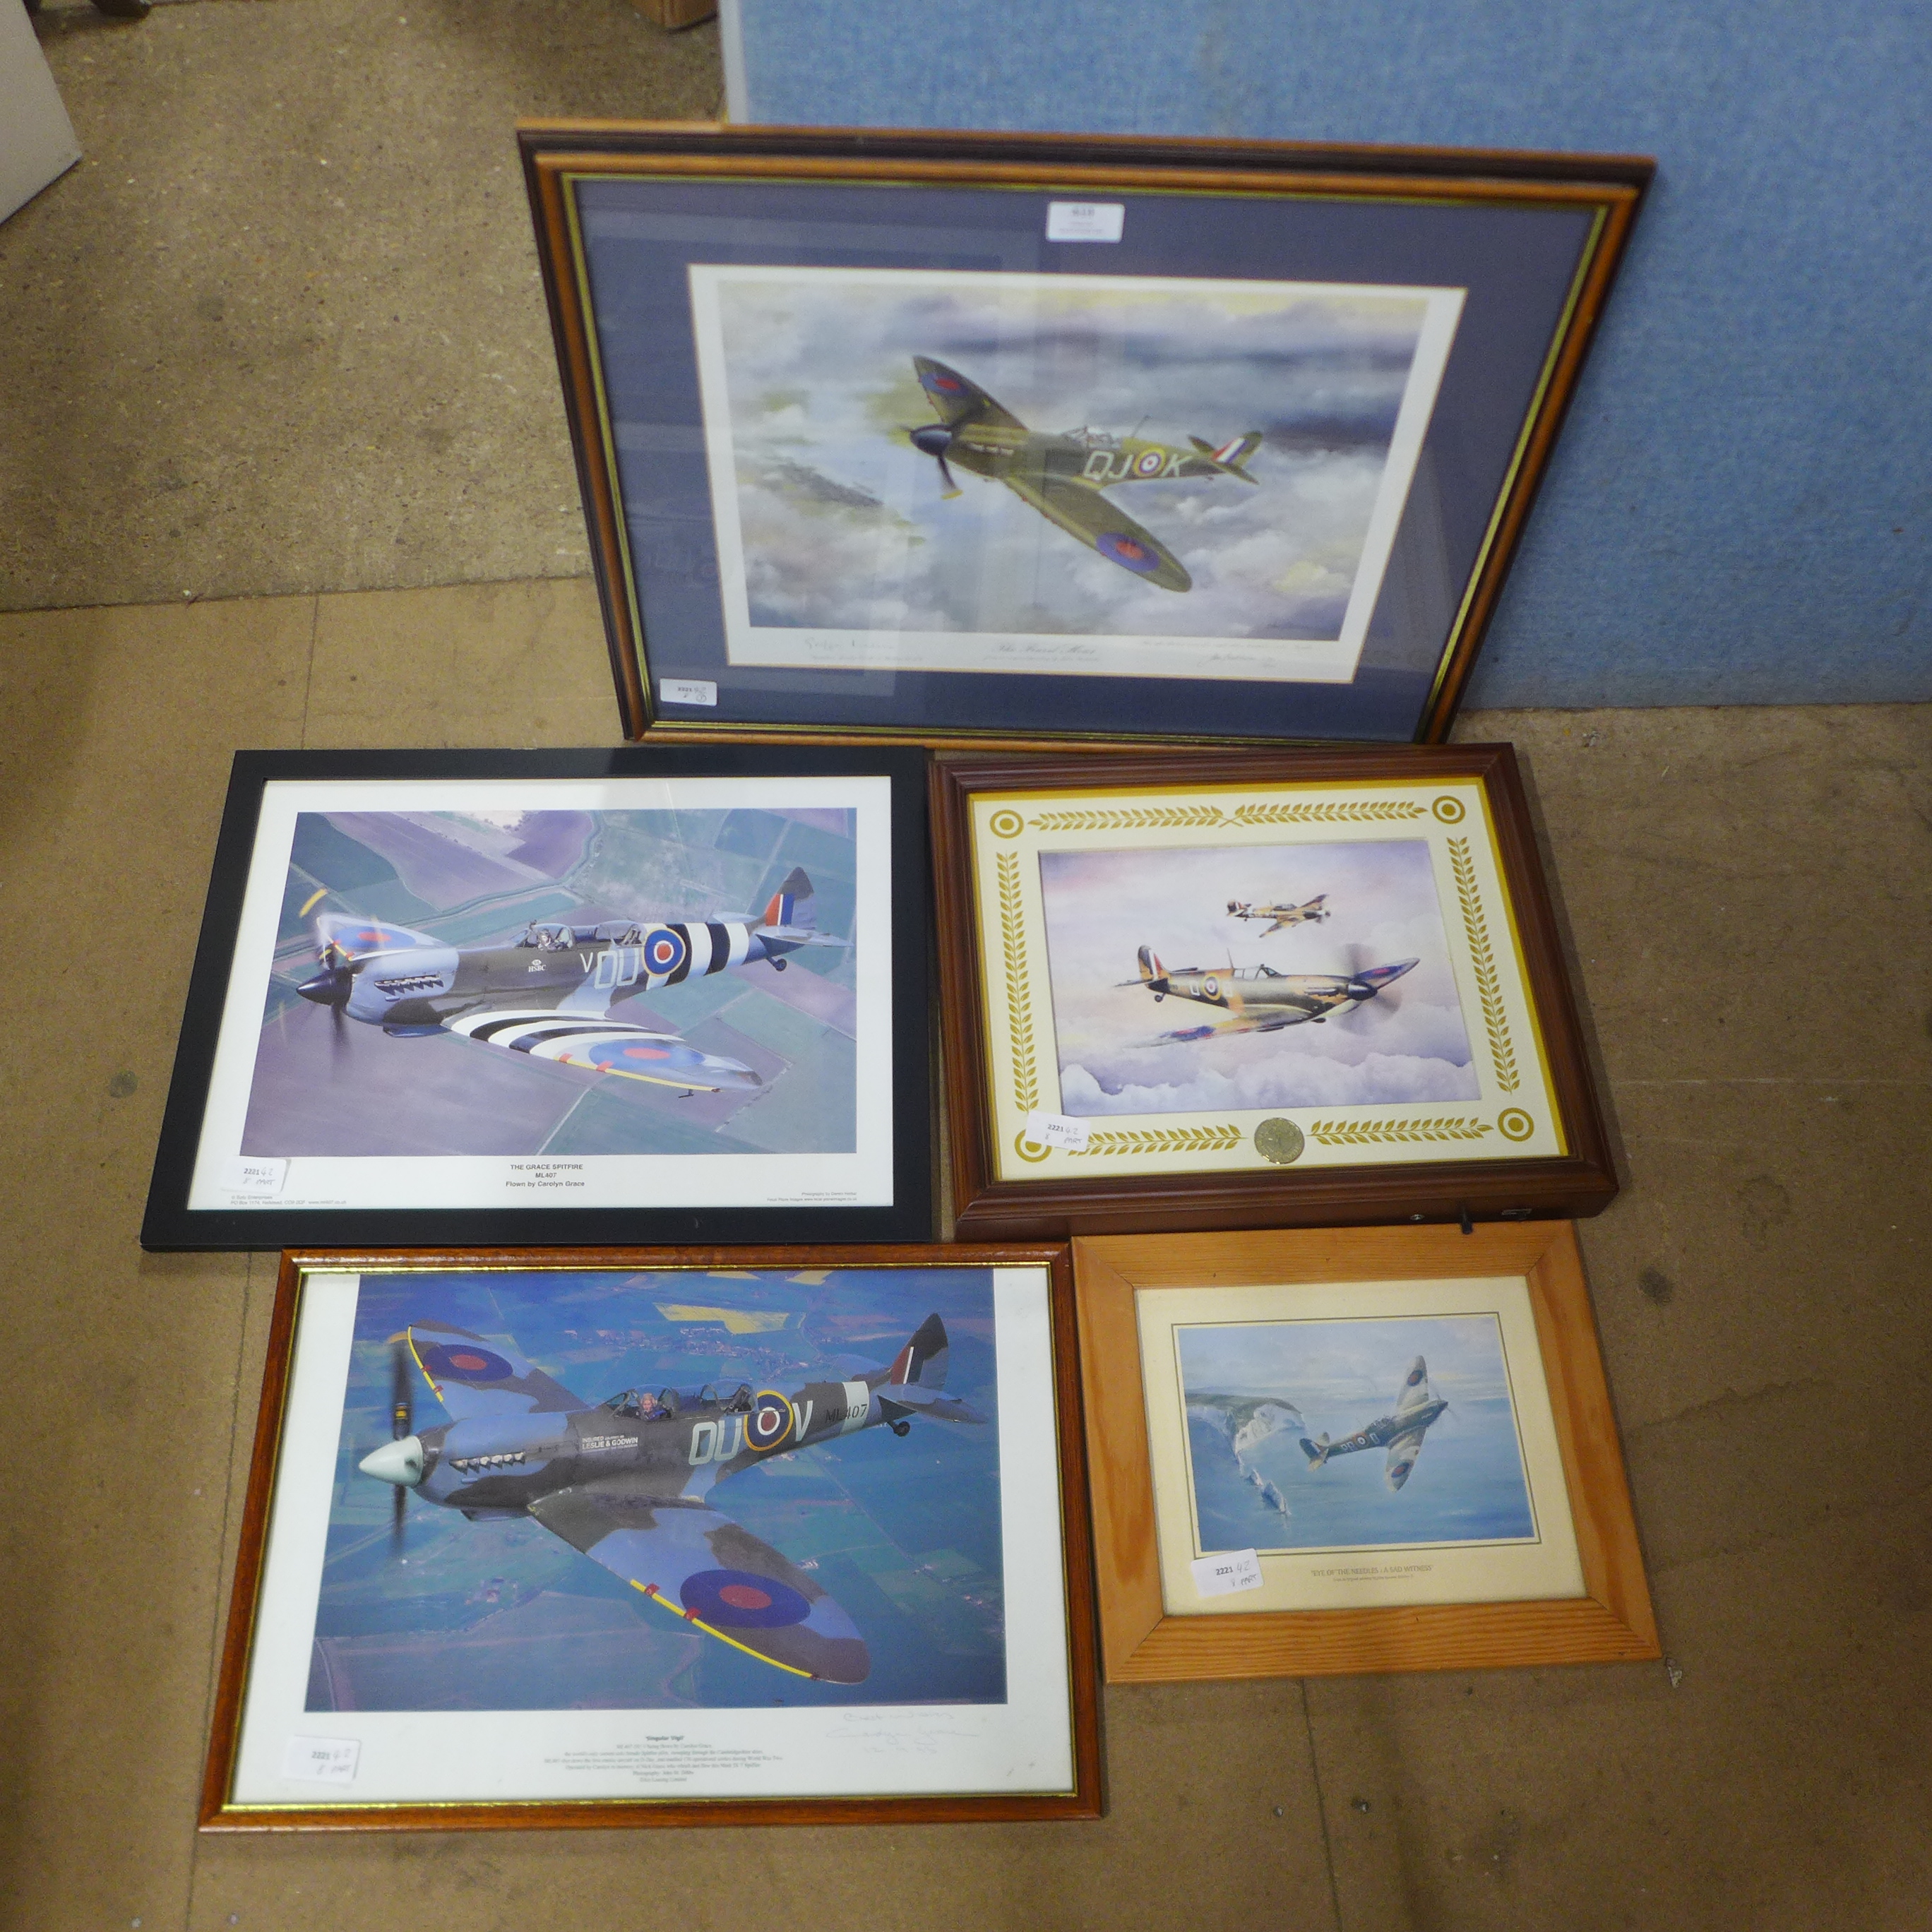 Two signed aircraft prints, including The Finest Hour by John Batchelor, 379/1940, signed by the - Image 2 of 2